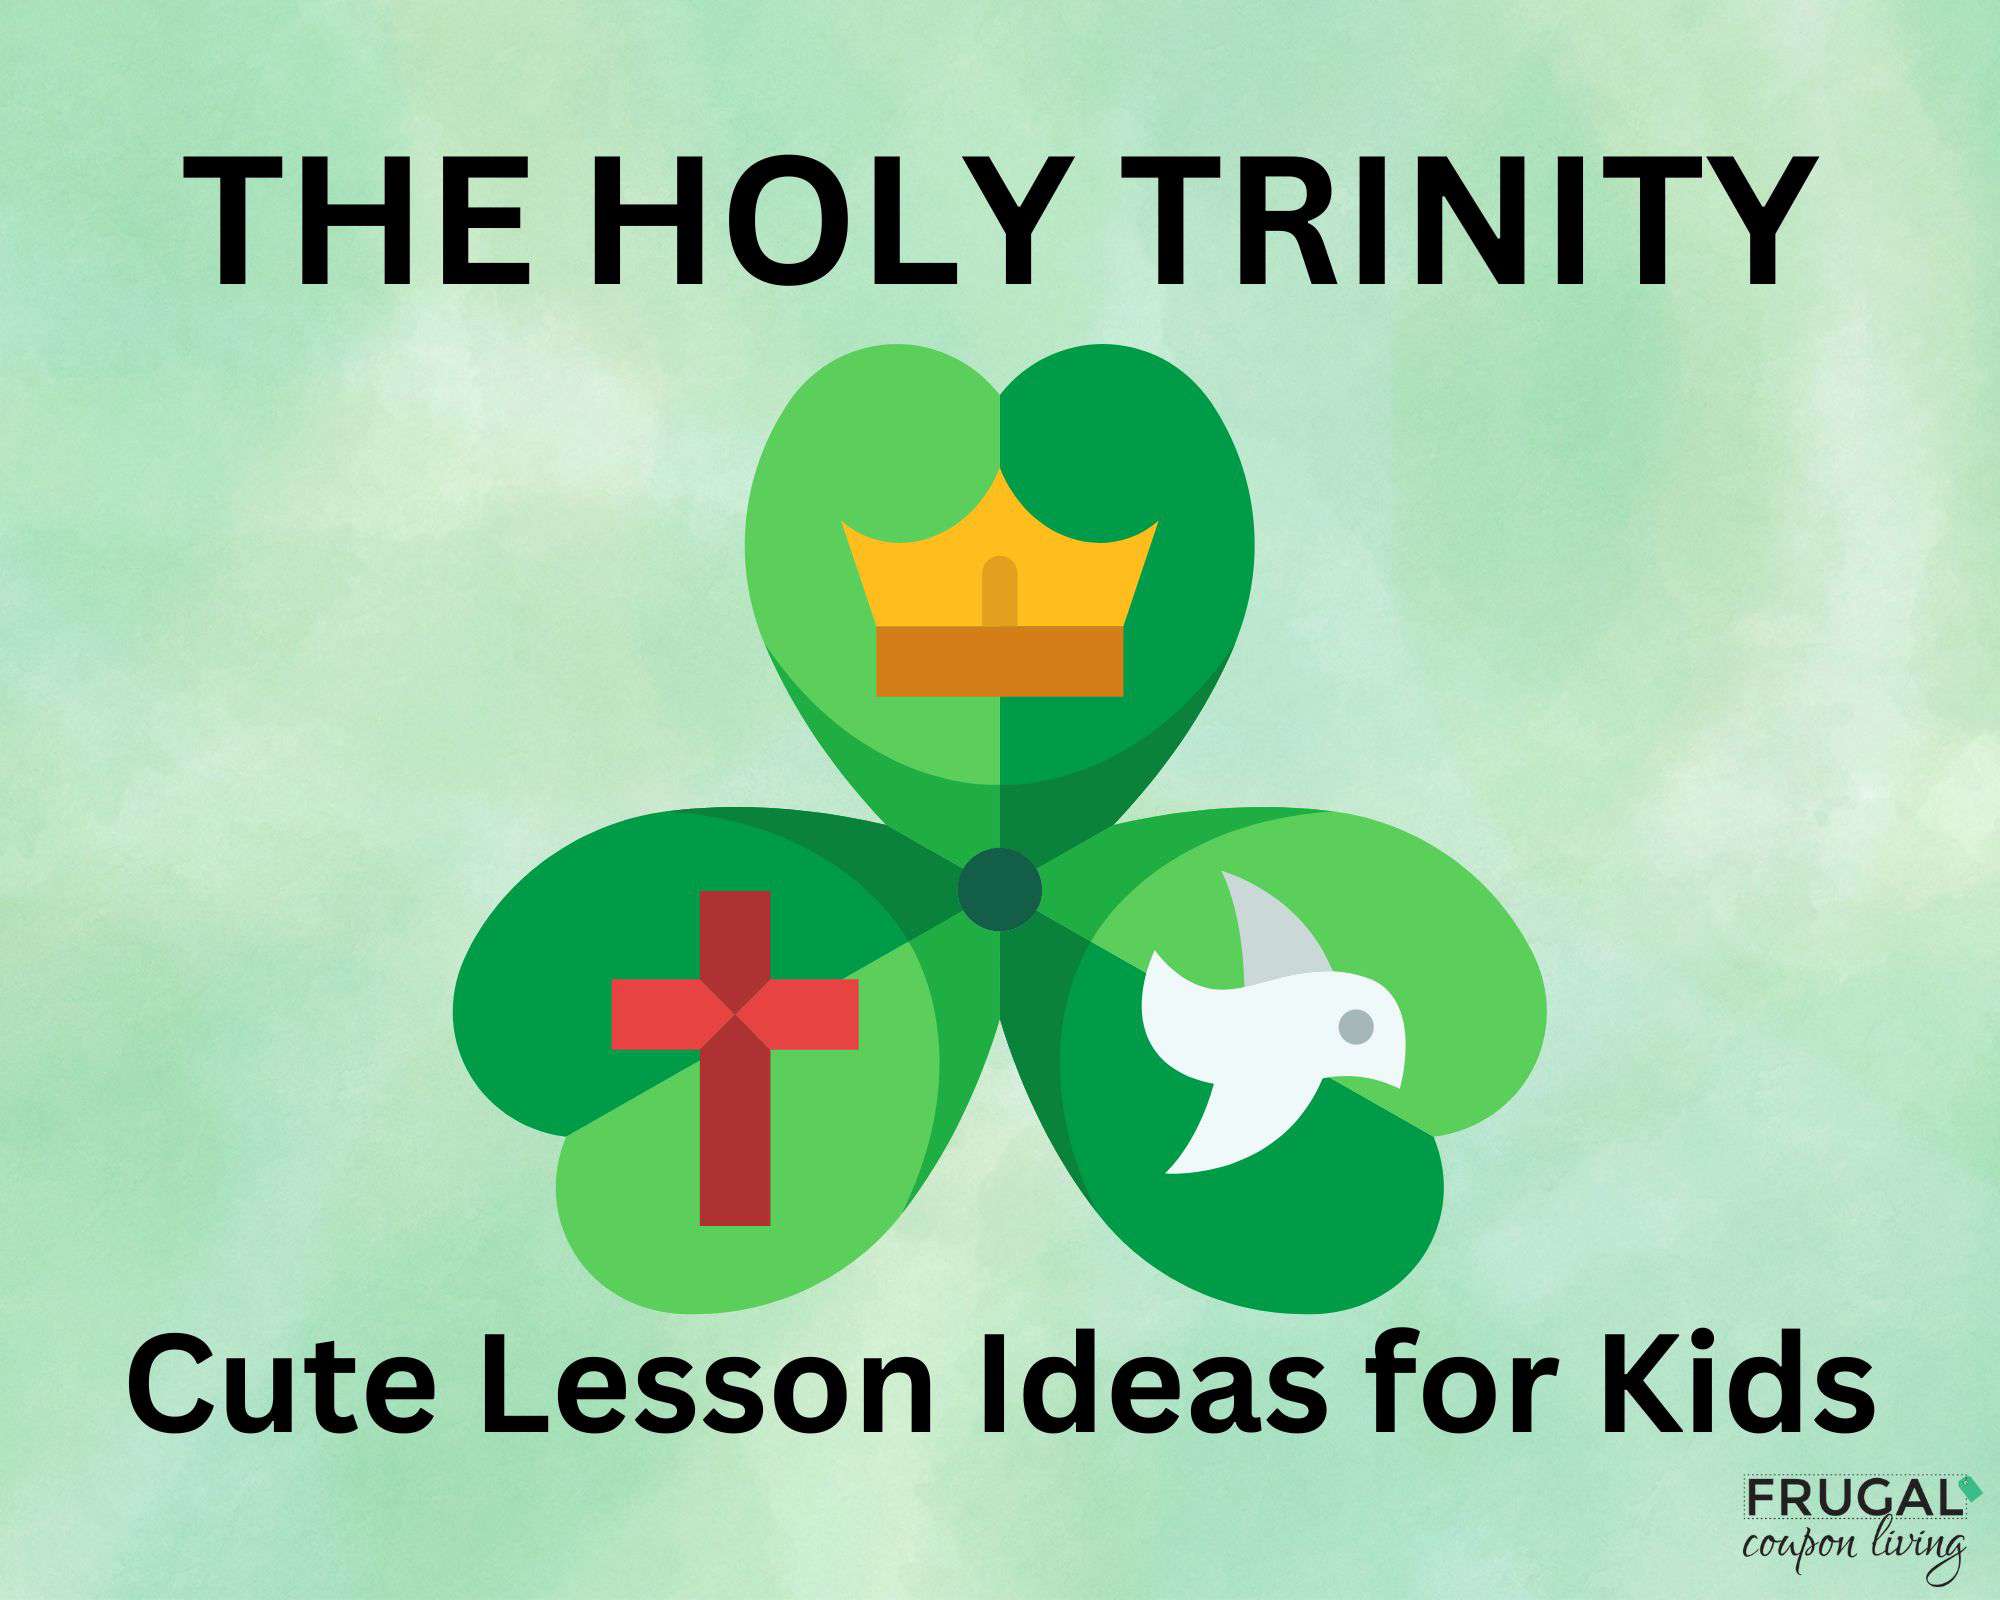 The holy trinity ideas for kids